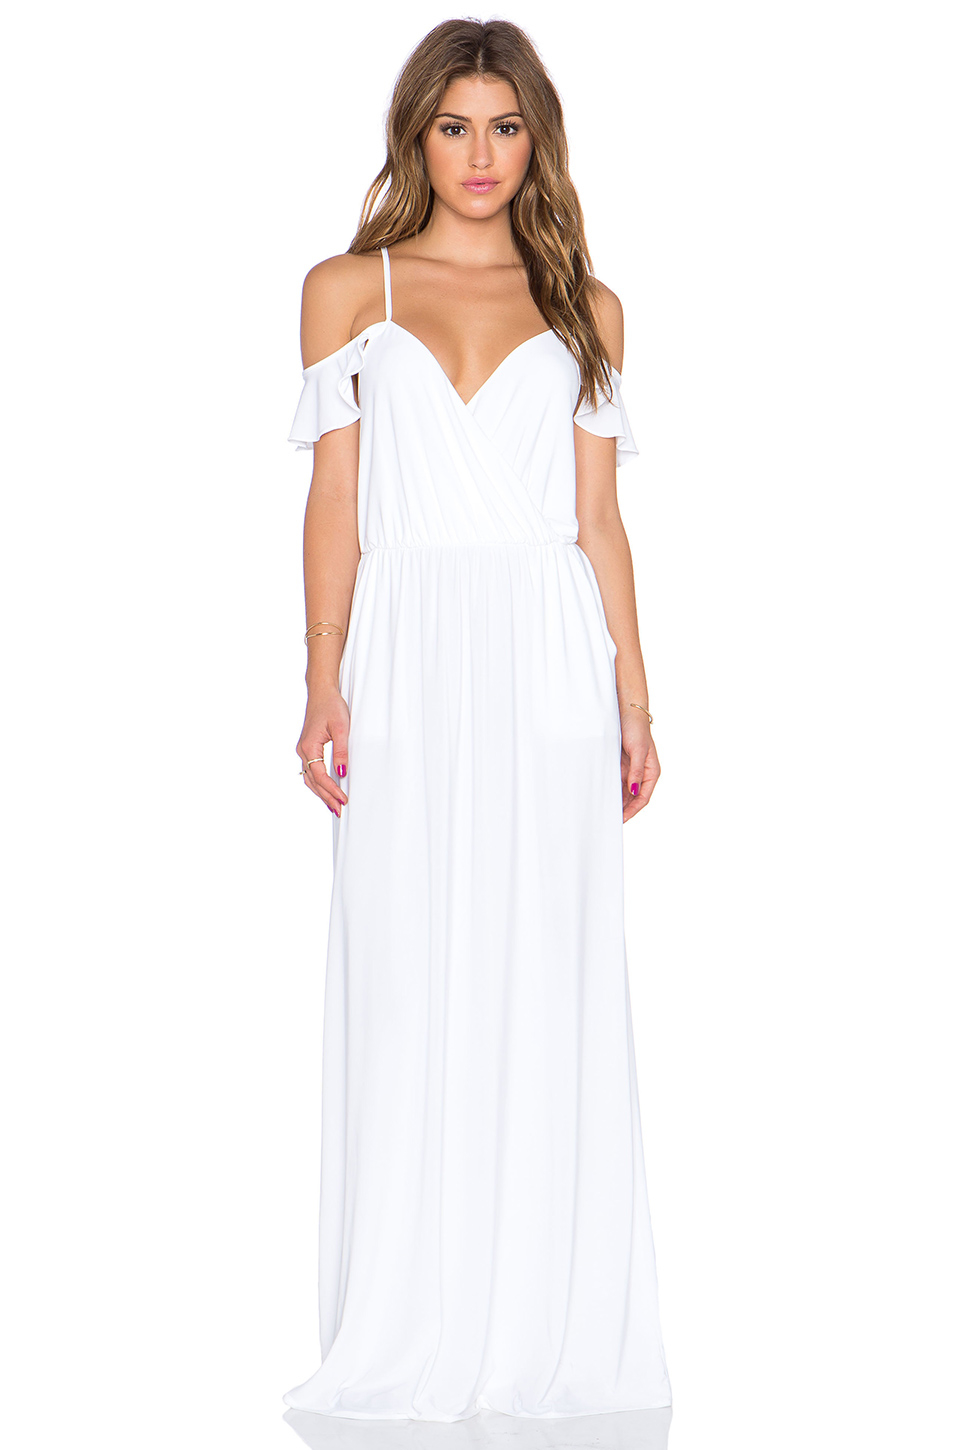 Lyst - T-Bags Cold Shoulder Maxi Dress in White